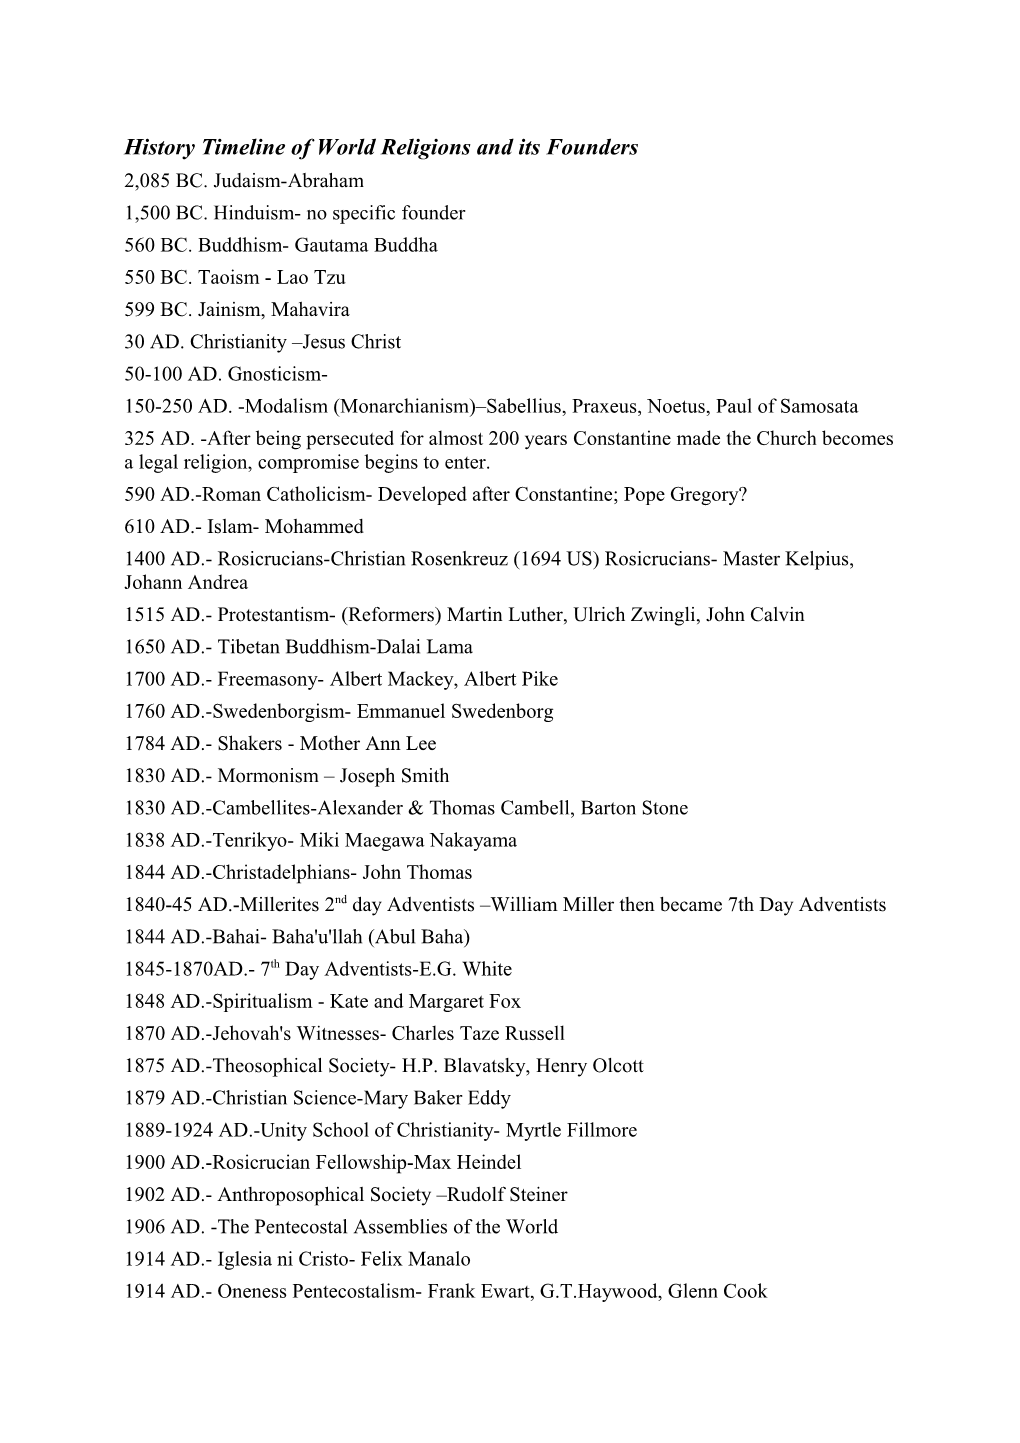 History Timeline of World Religions and Its Founders